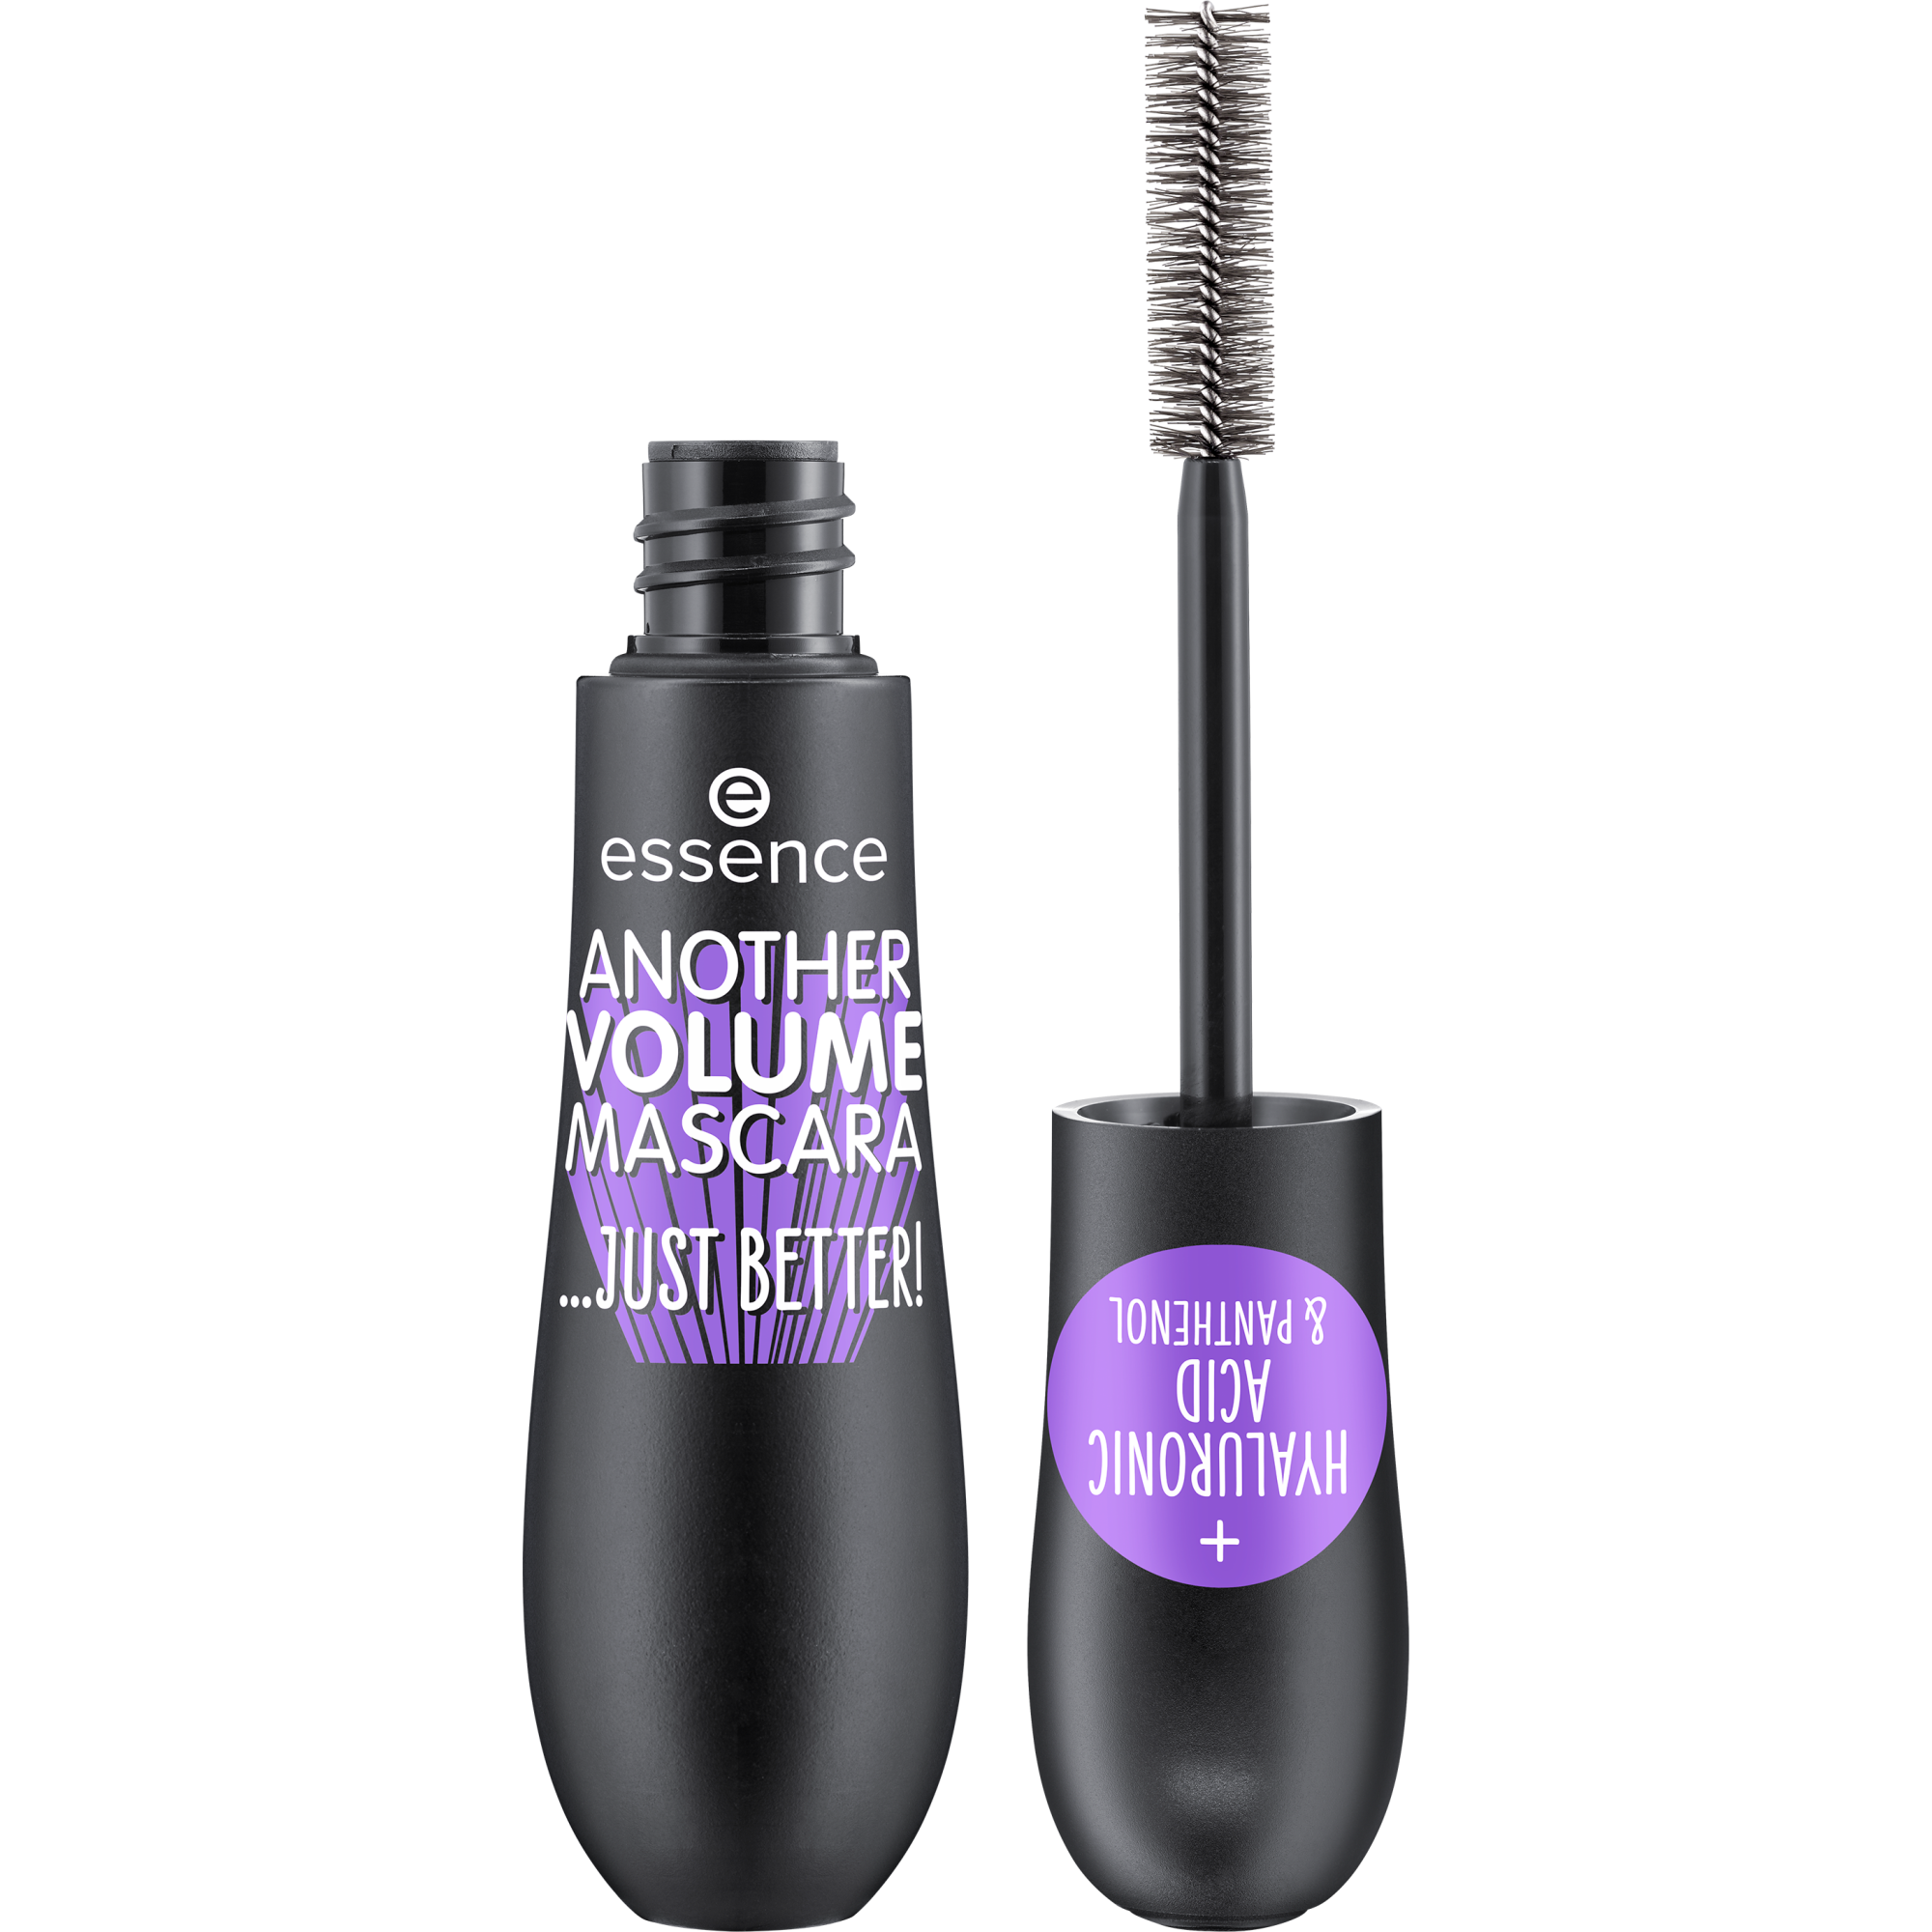 ANOTHER VOLUME MASCARA...JUST BETTER!